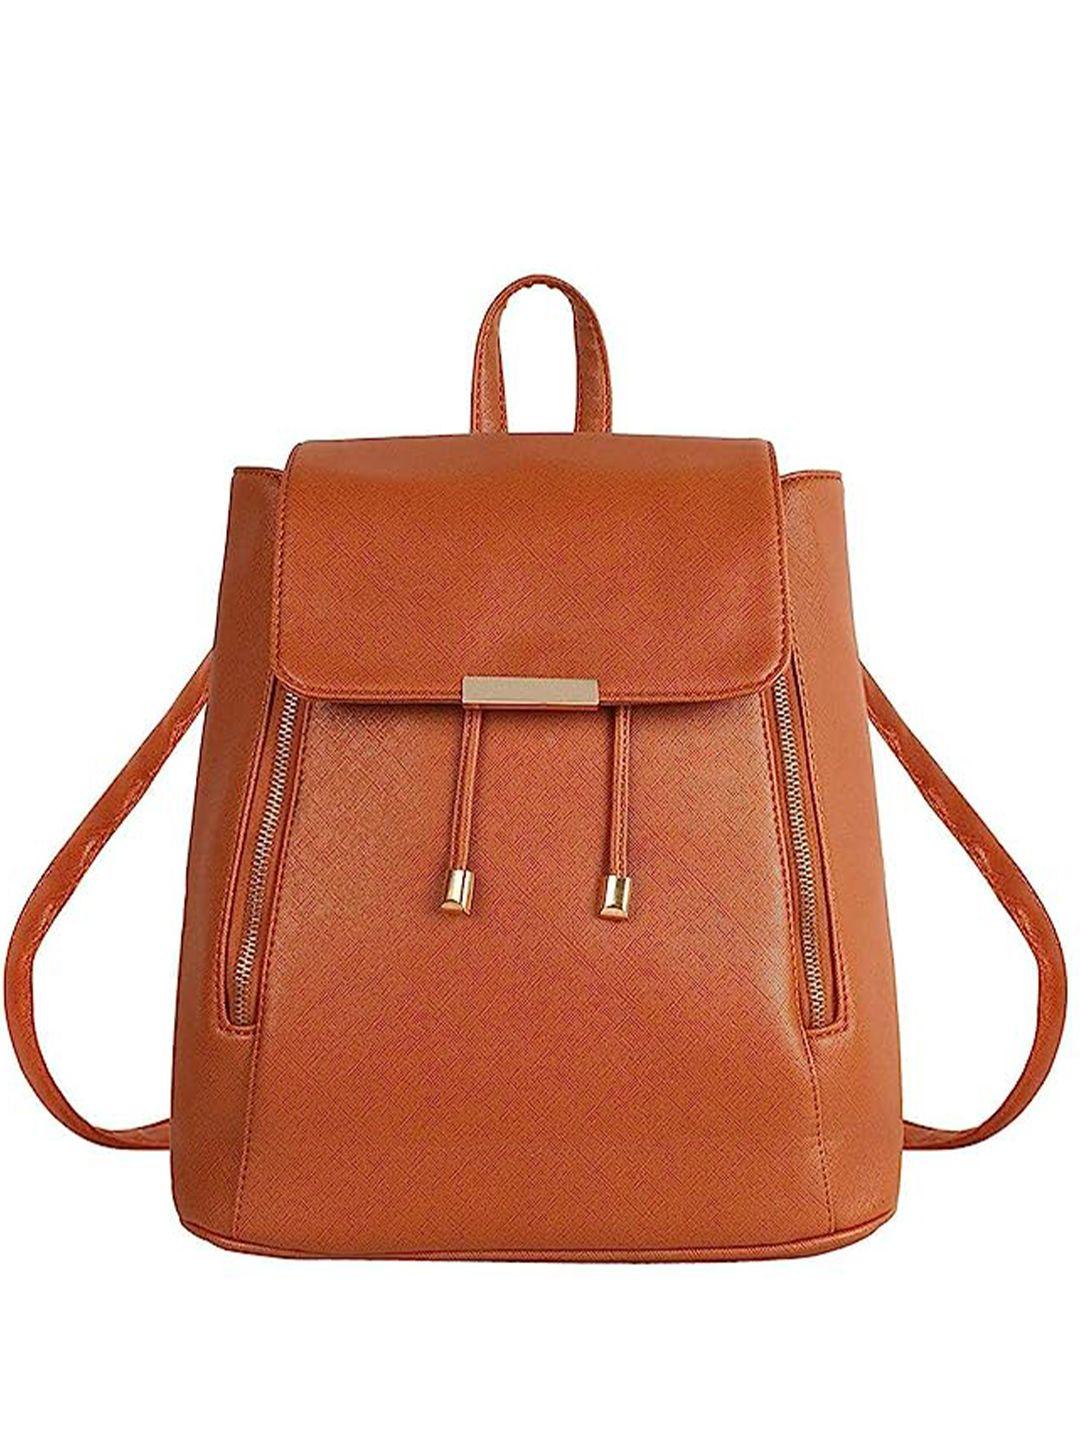 mast & harbour tan women tan tie up detail backpack up to 15 inch